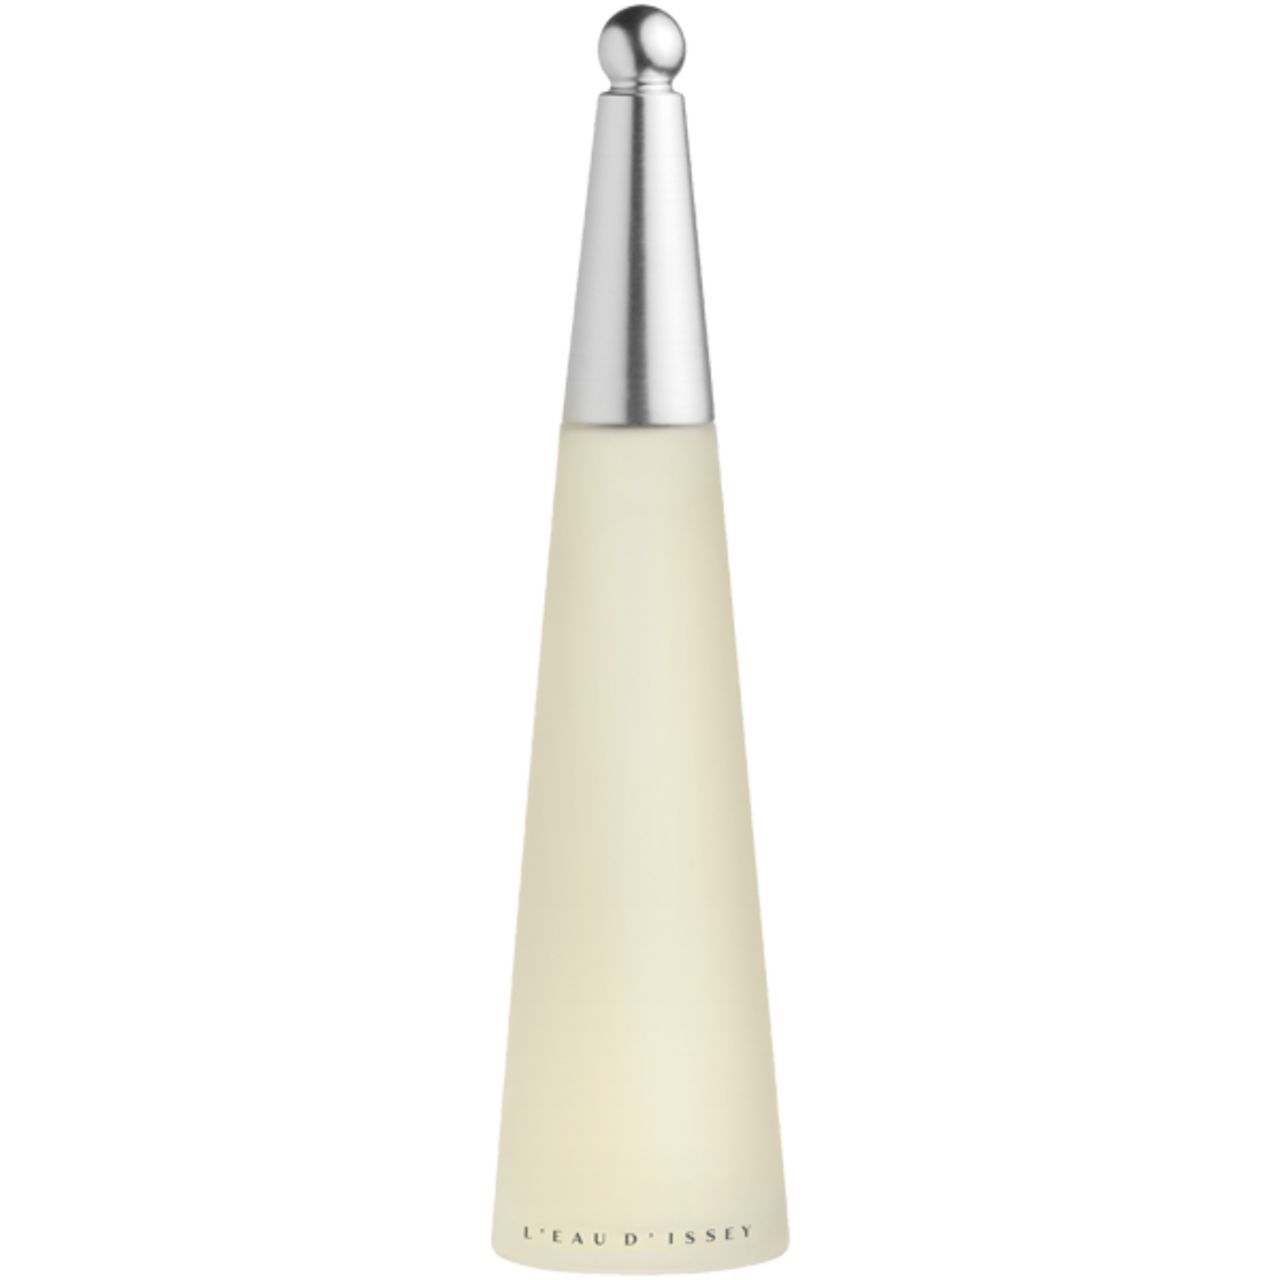 Issey Miyake, L'Eau d'Issey E.d.T. Nat. Spray